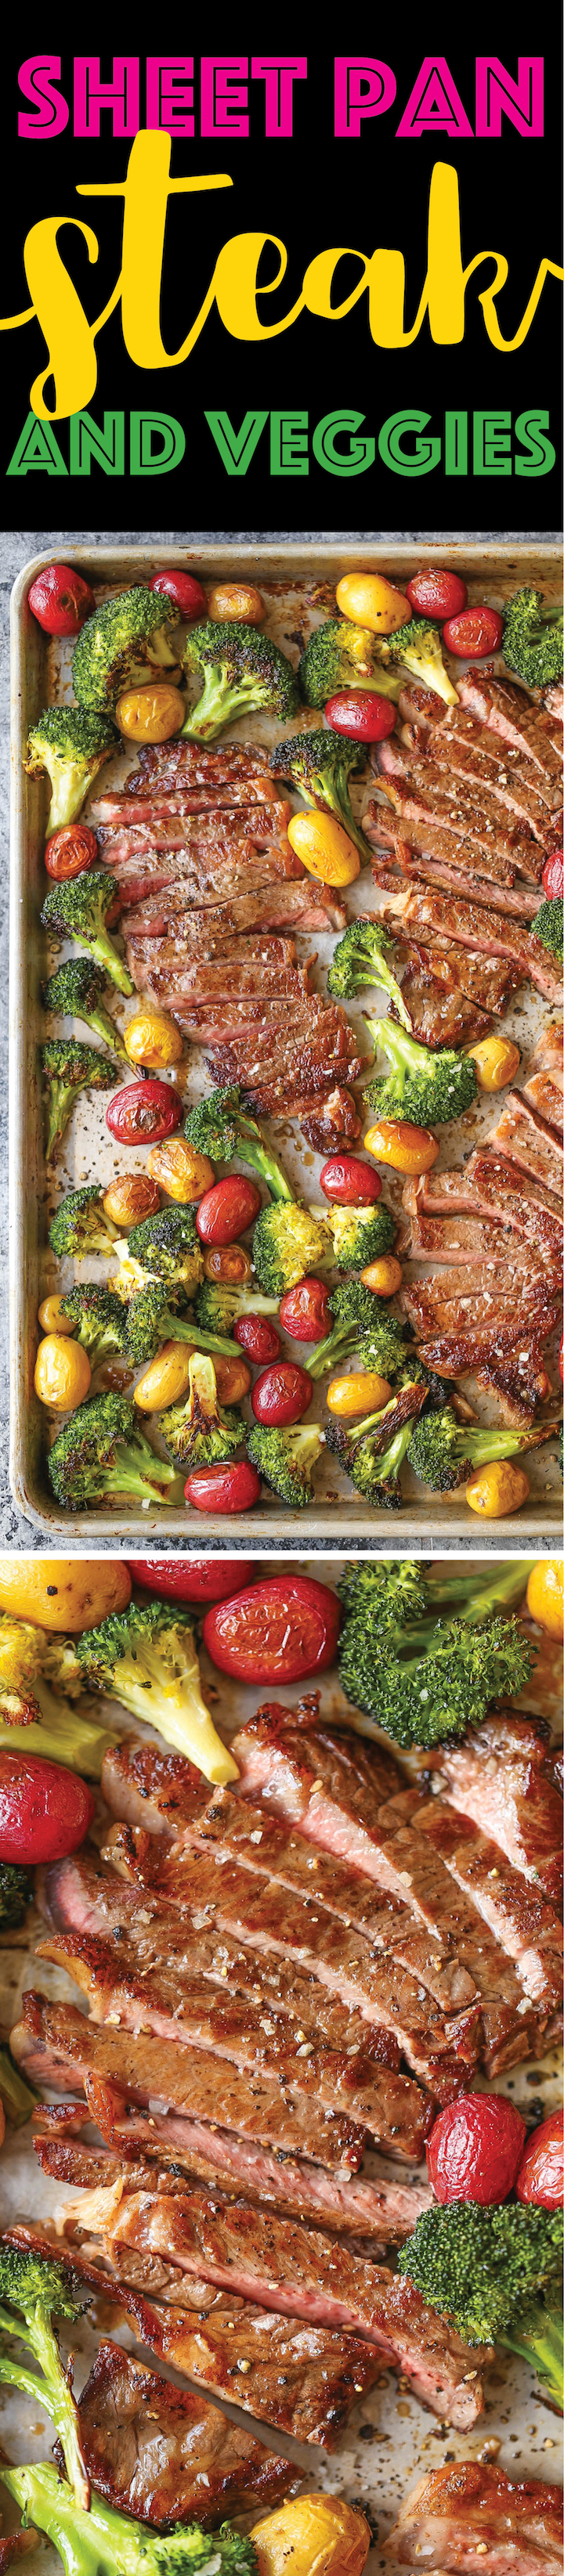 Sheet Pan Steak and Veggies - Perfectly seasoned, melt-in-your-mouth tender steak with potatoes and broccoli. All made on 1 single sheet pan! EASY CLEAN UP!